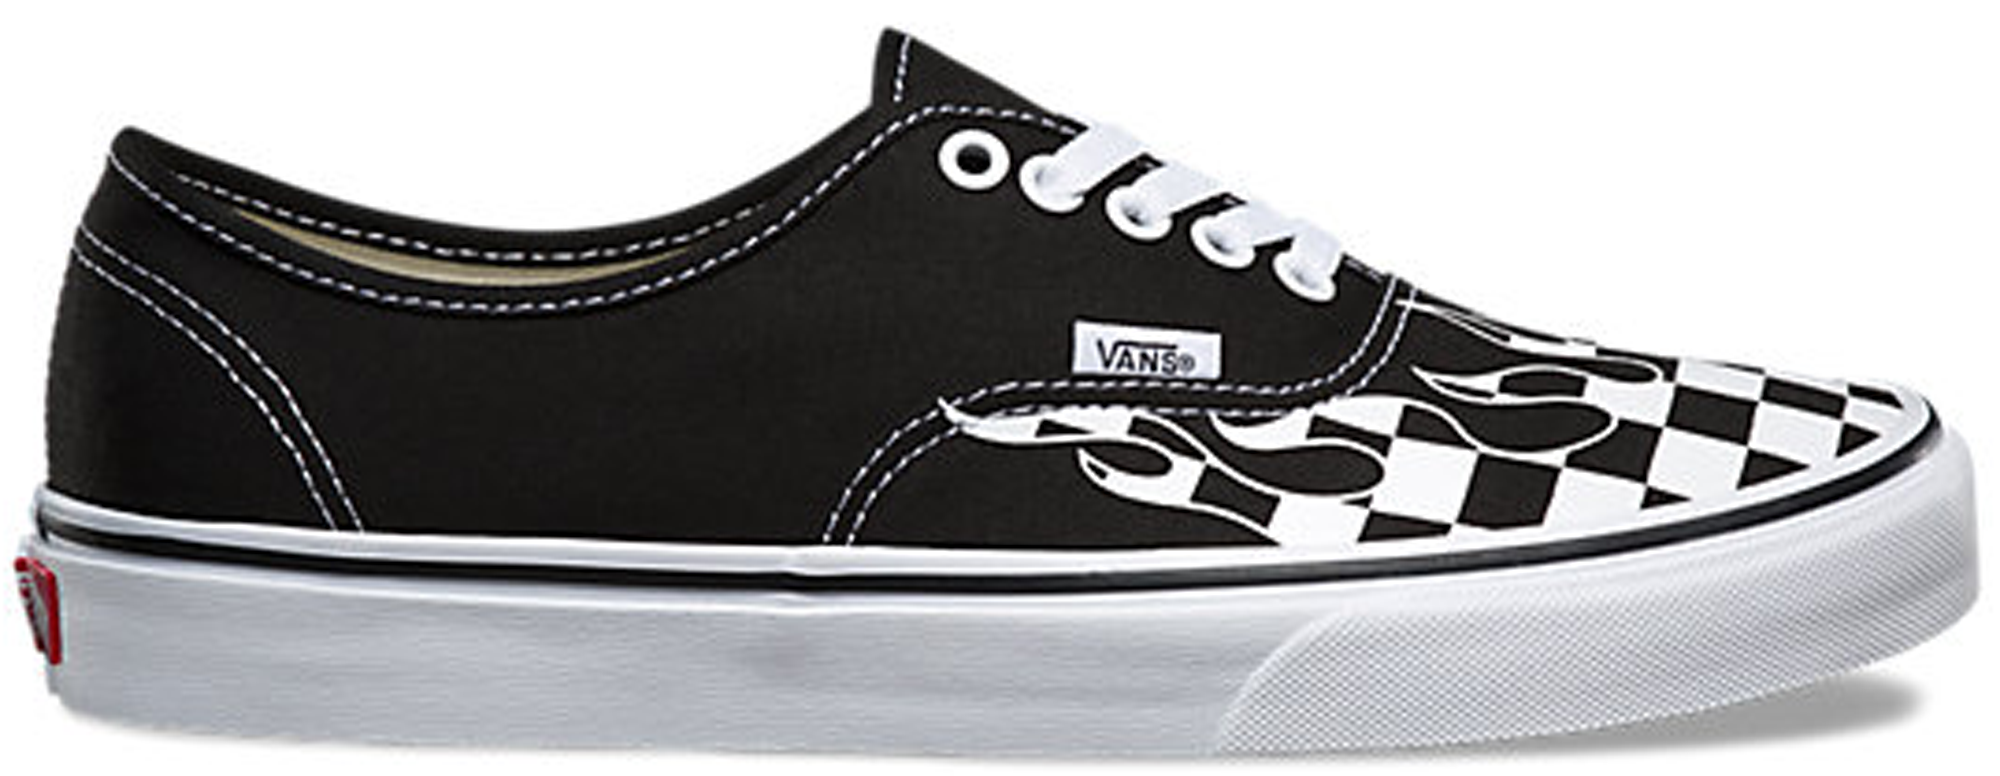 vans authentic b and y